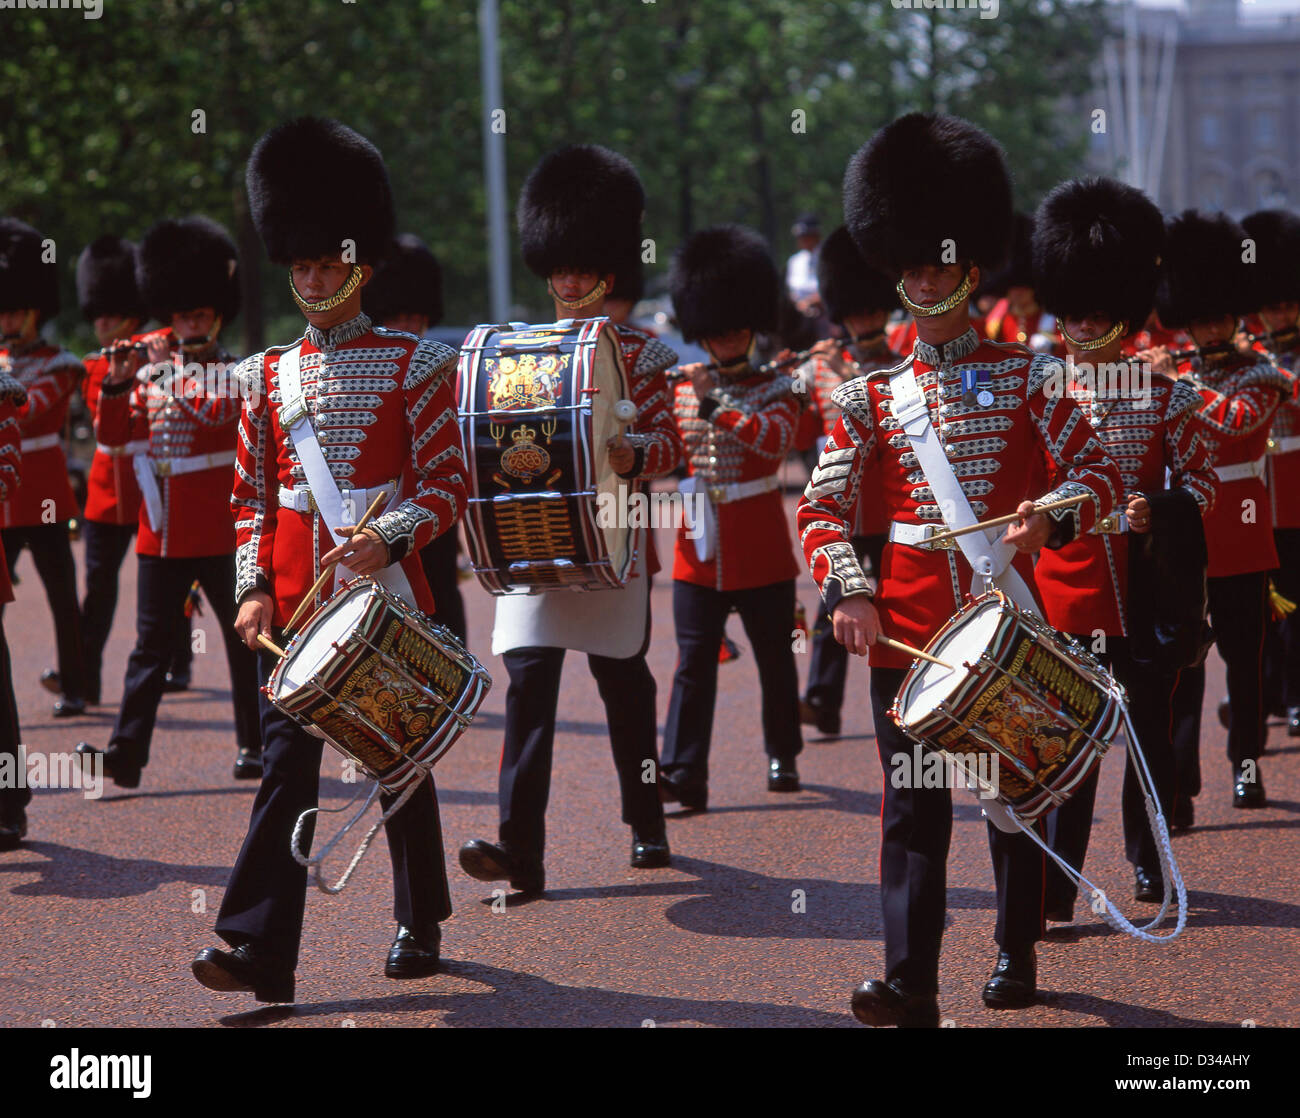 Groupe Grenadier Guards, City of Westminster, Greater London, Angleterre, Royaume-Uni Banque D'Images